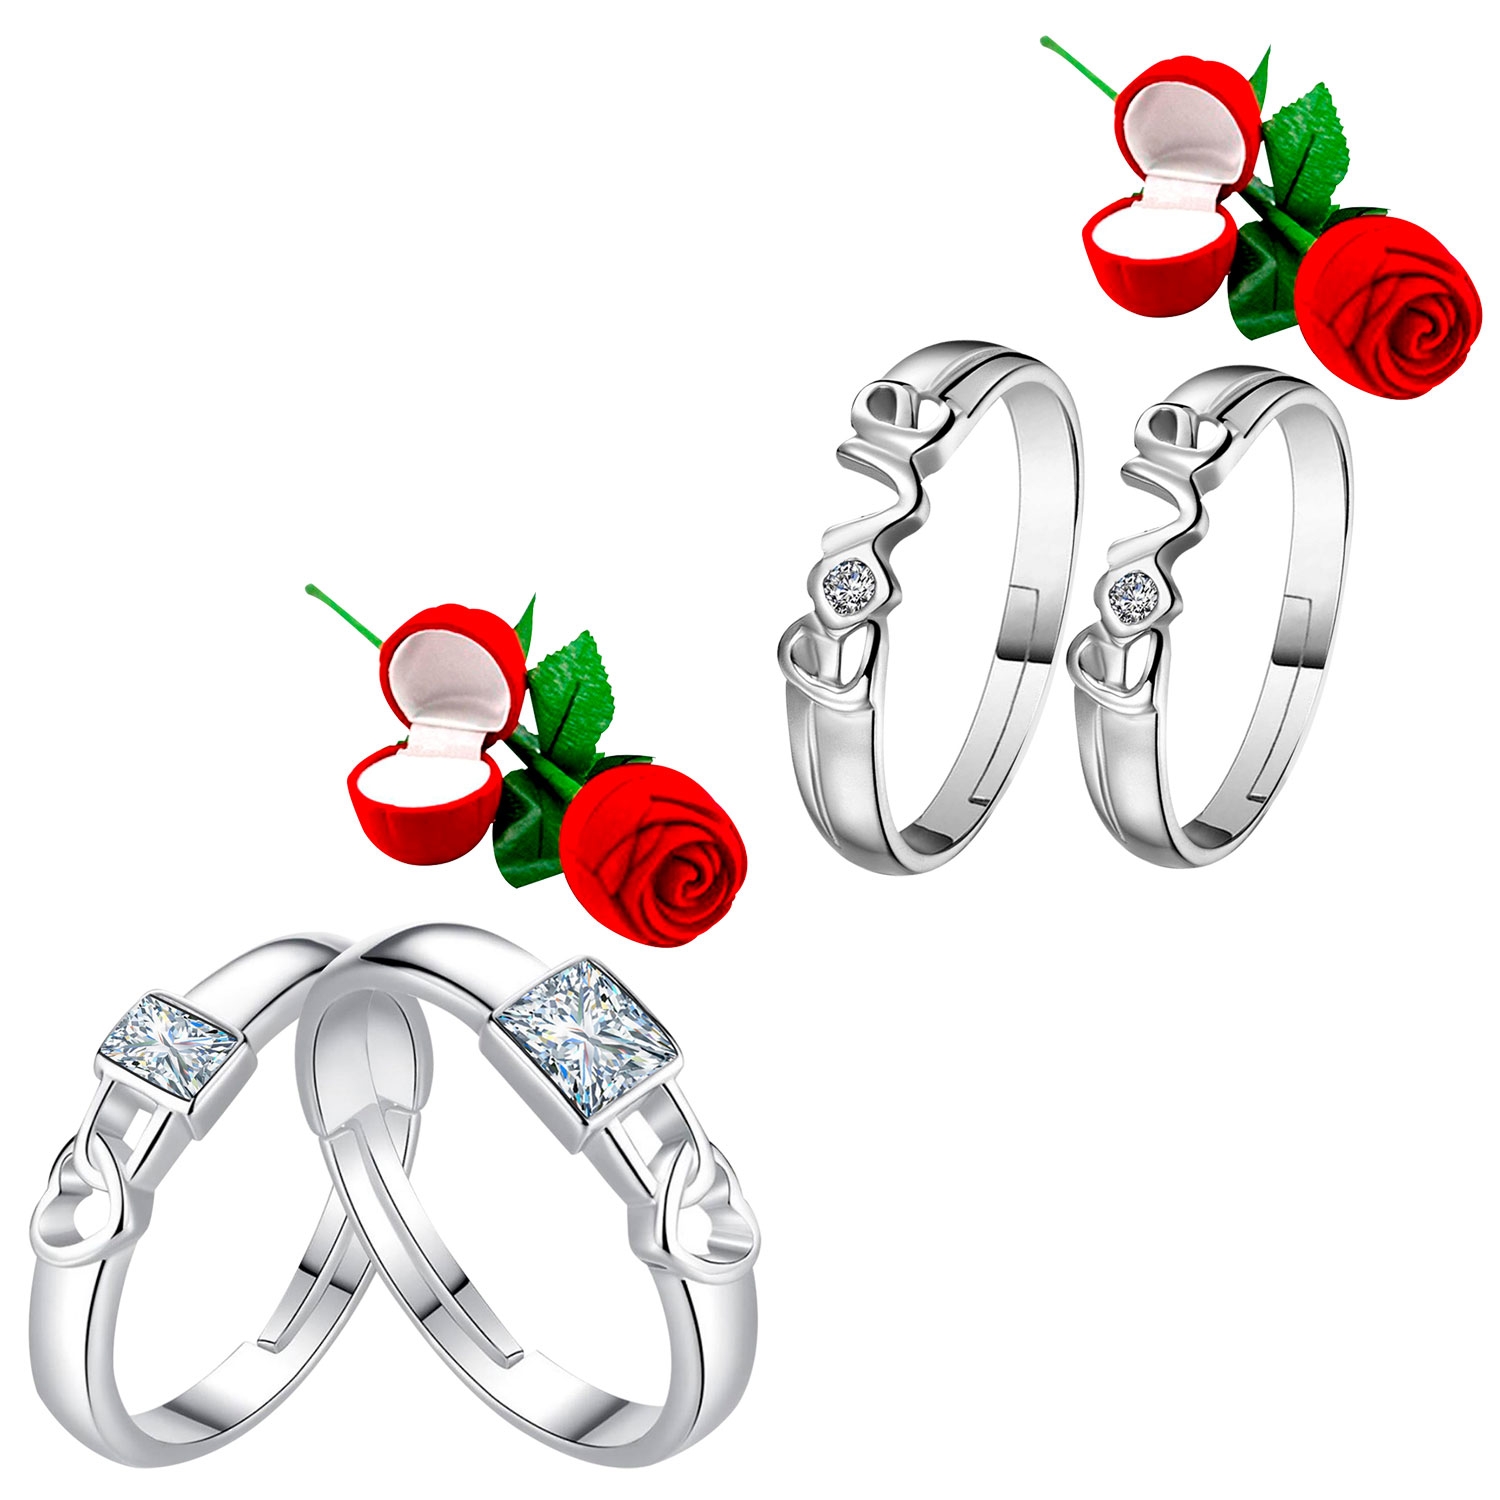 SILVER SHINE |  Adjustable Party Wear Couple Rings Set for lovers with 2 Piece Red Rose Gift Box Silver Plated Ring for Men and Women 